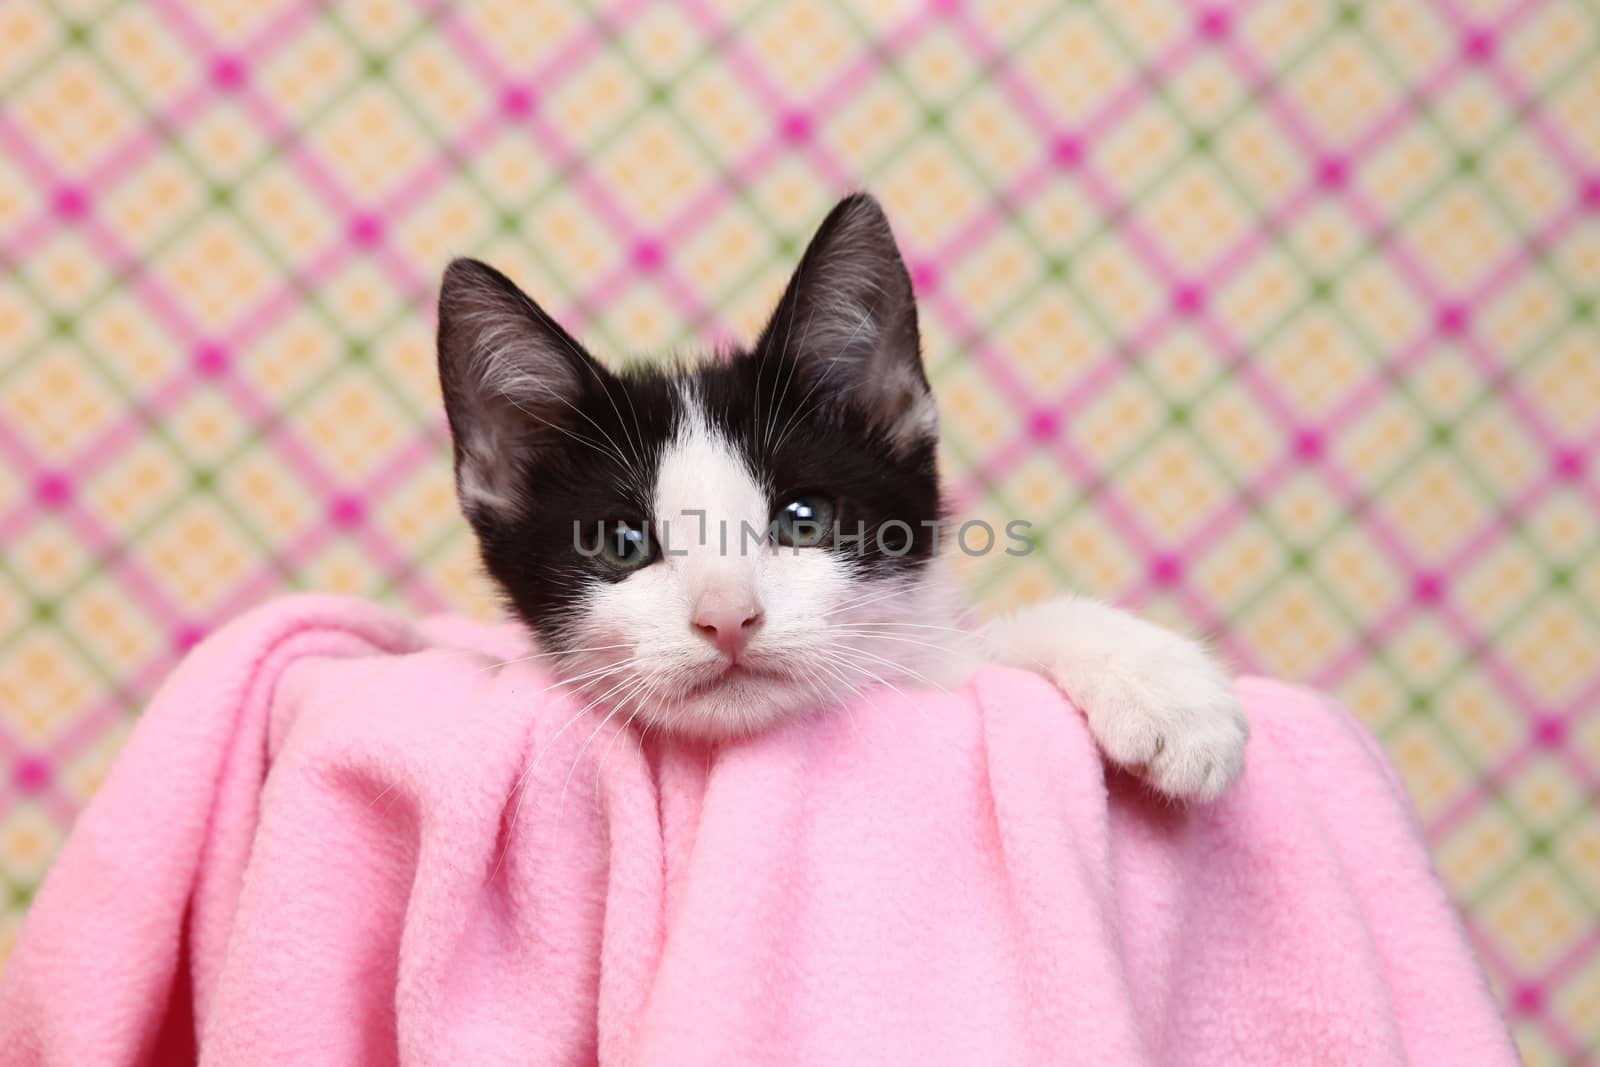 Curious Kitten on a Pink Soft Background by tobkatrina